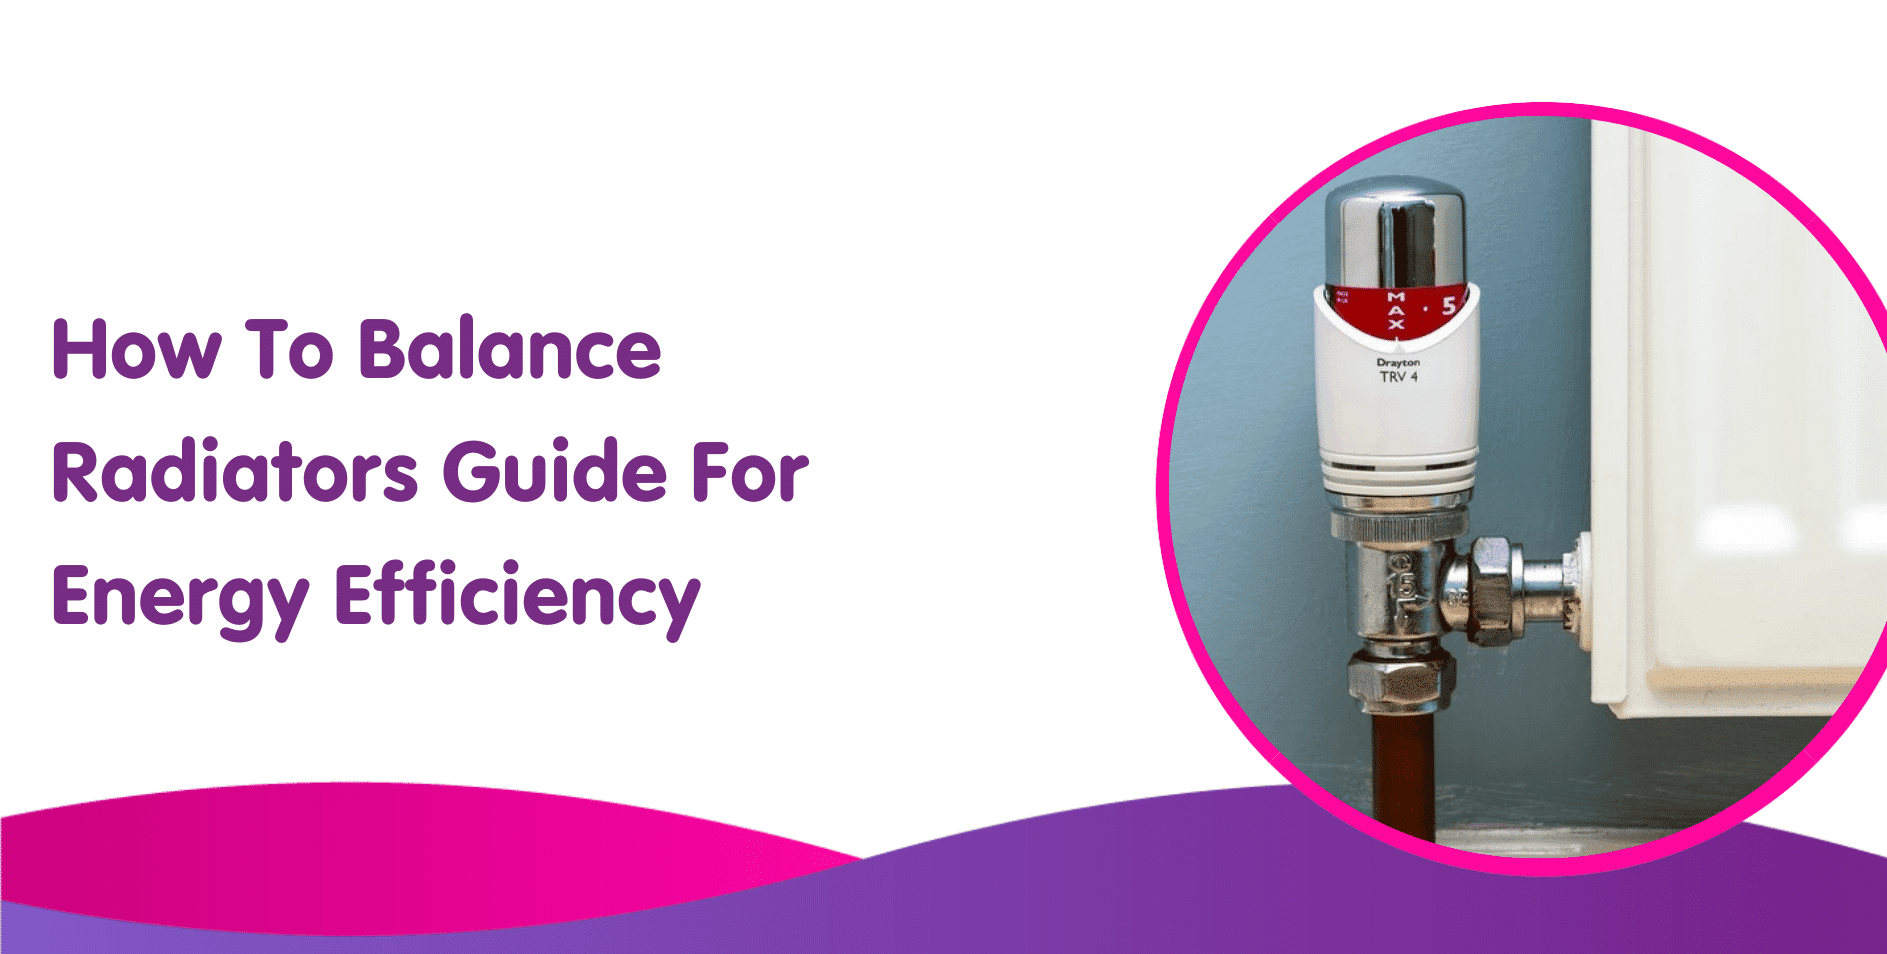 How To Balance Radiators Guide For Energy Efficiency